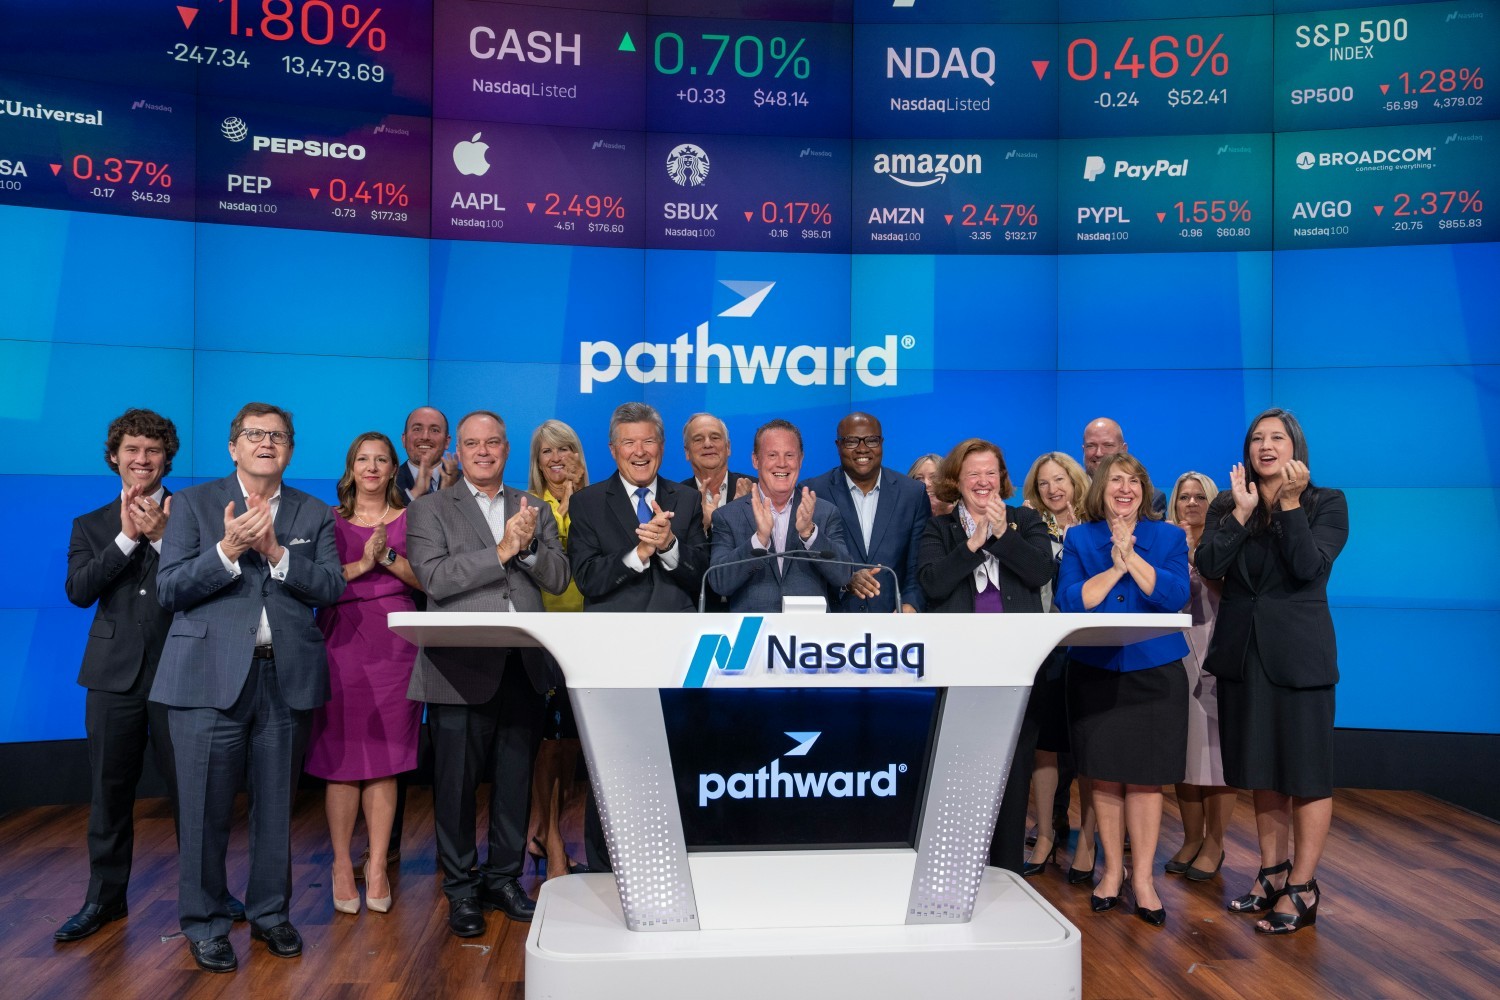 Joined by company leaders and the Board of Directors, CEO Brett Pharr rang the closing bell at the Nasdaq MarketSite. 